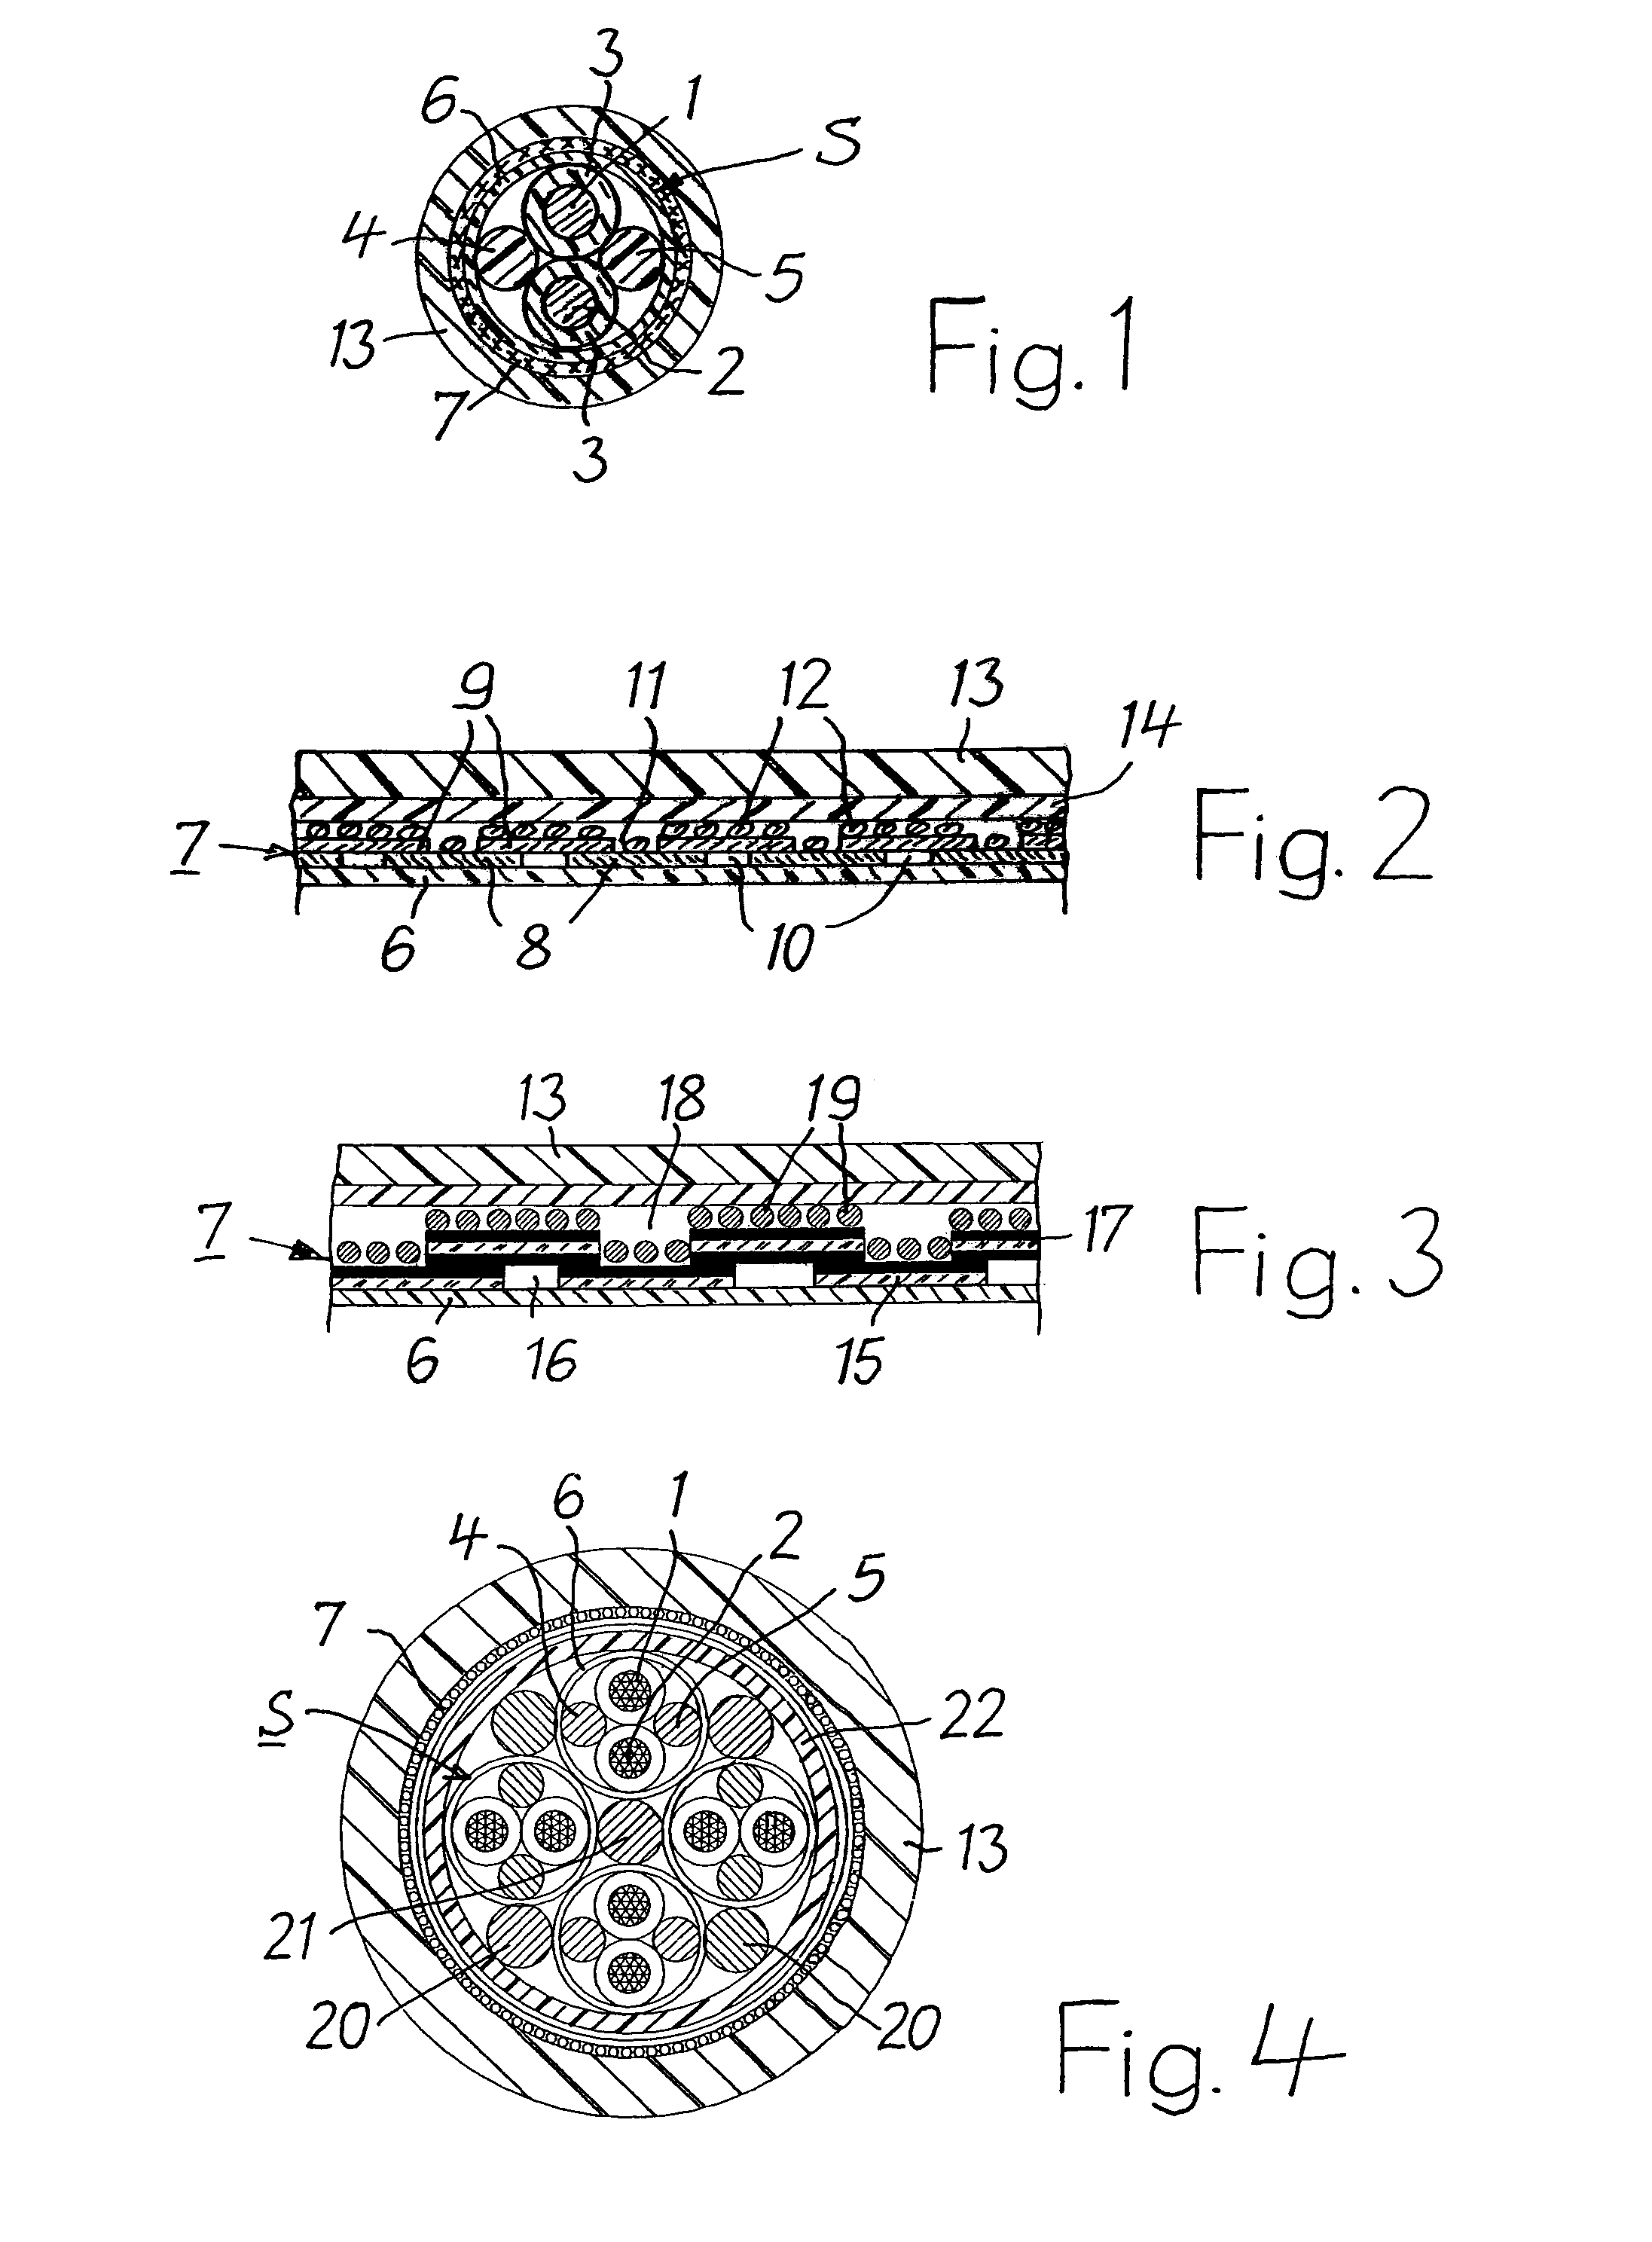 Data transmission cable for connection to mobile devices